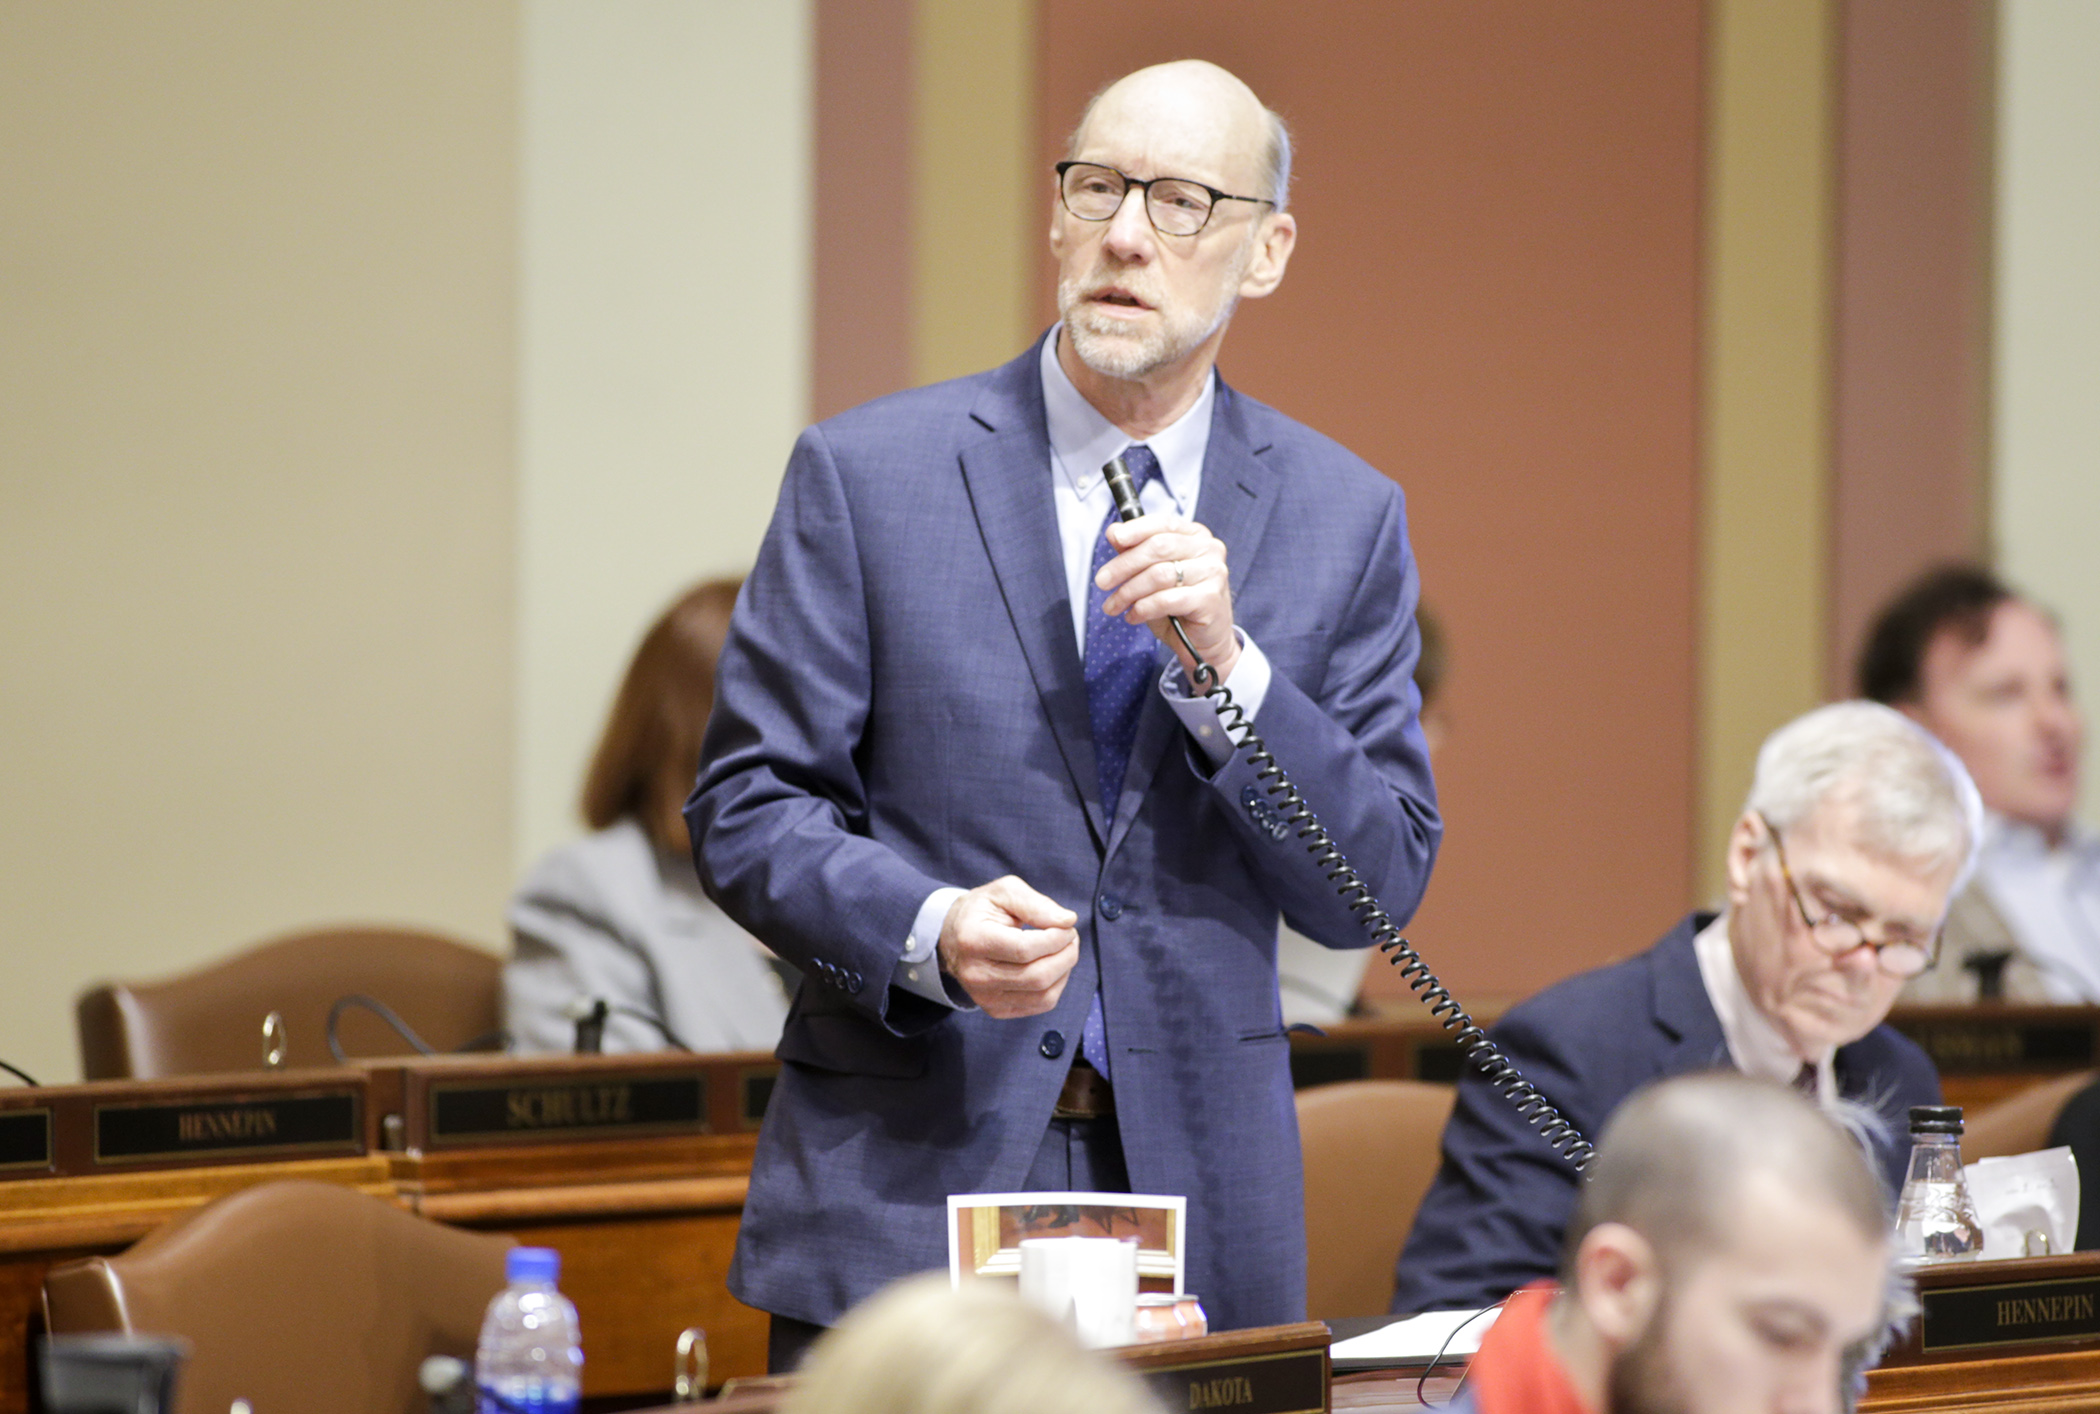 Rep. Jim Davnie, chair of the House Education Finance Division, outlines provisions of HF2400, the omnibus education finance bill, during the April 23 floor debate. Photo by Paul Battaglia